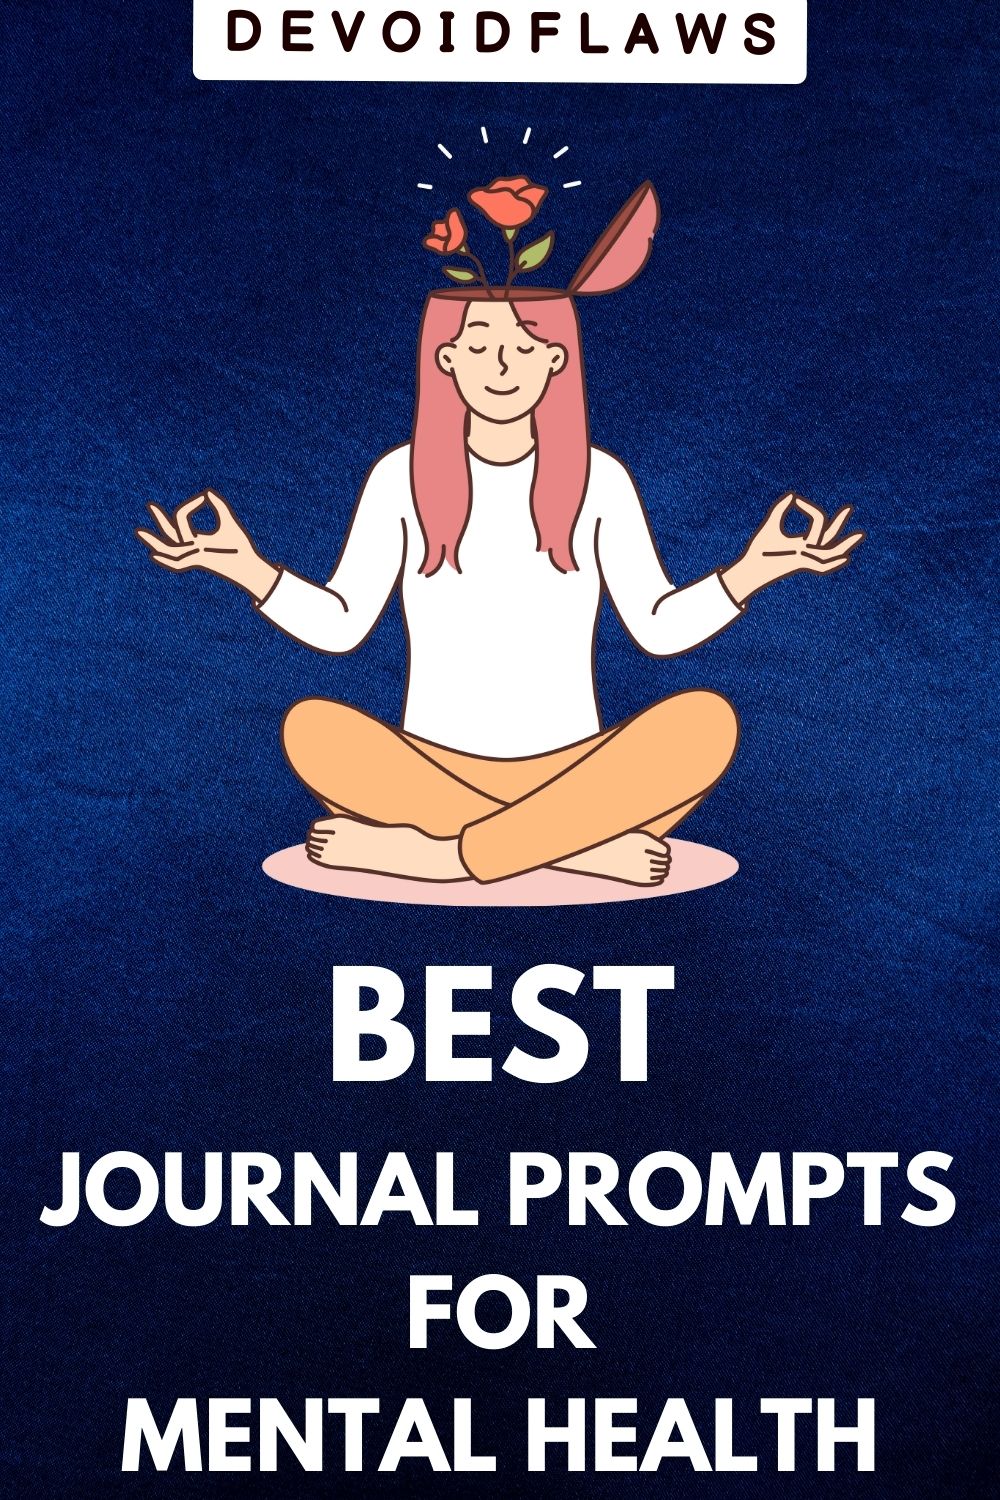 image with text - best journal prompts for mental health